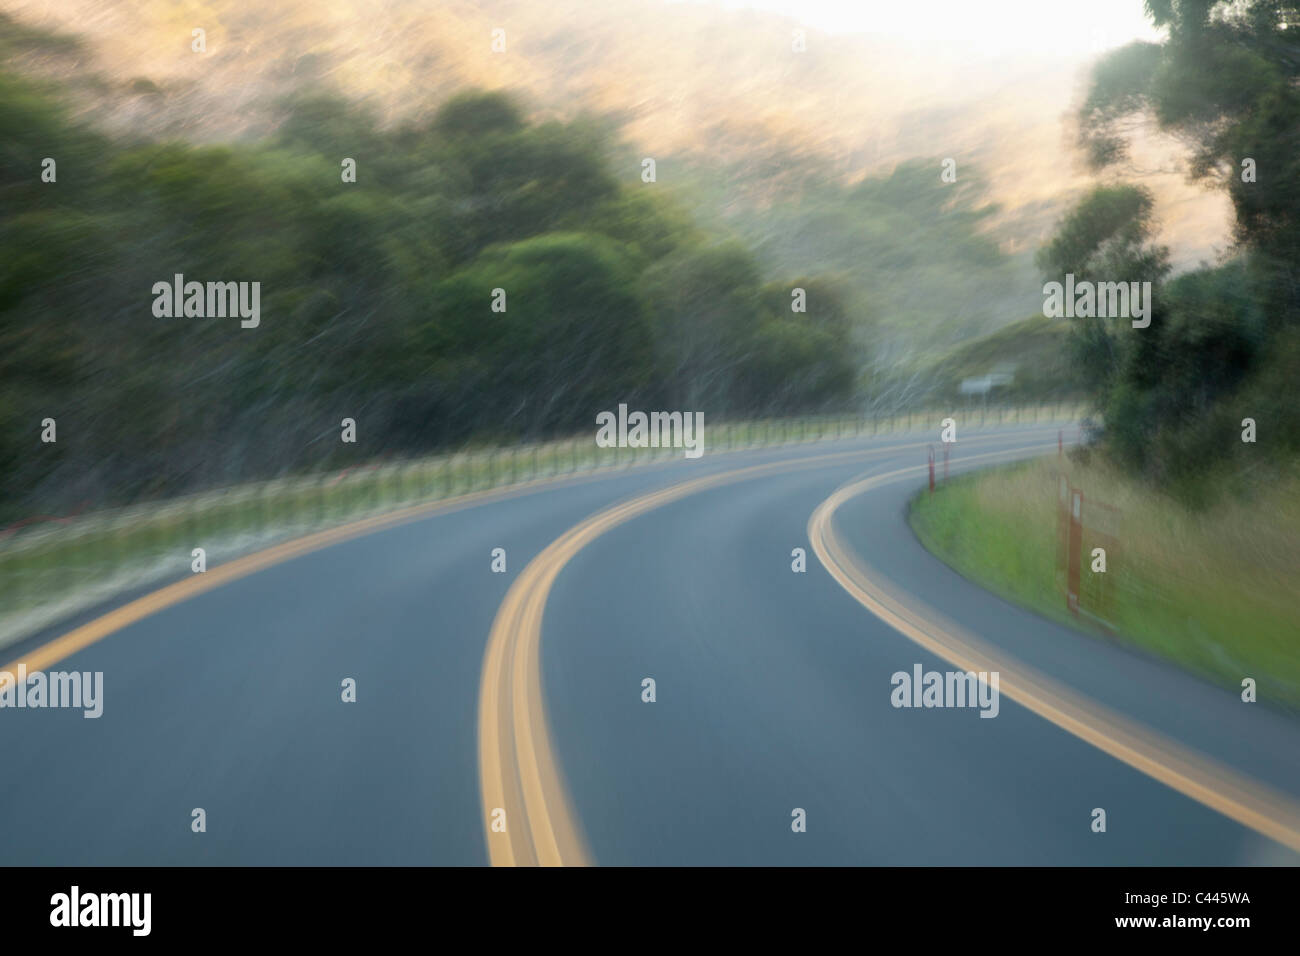 A curve in a highway road, blurred motion Stock Photo